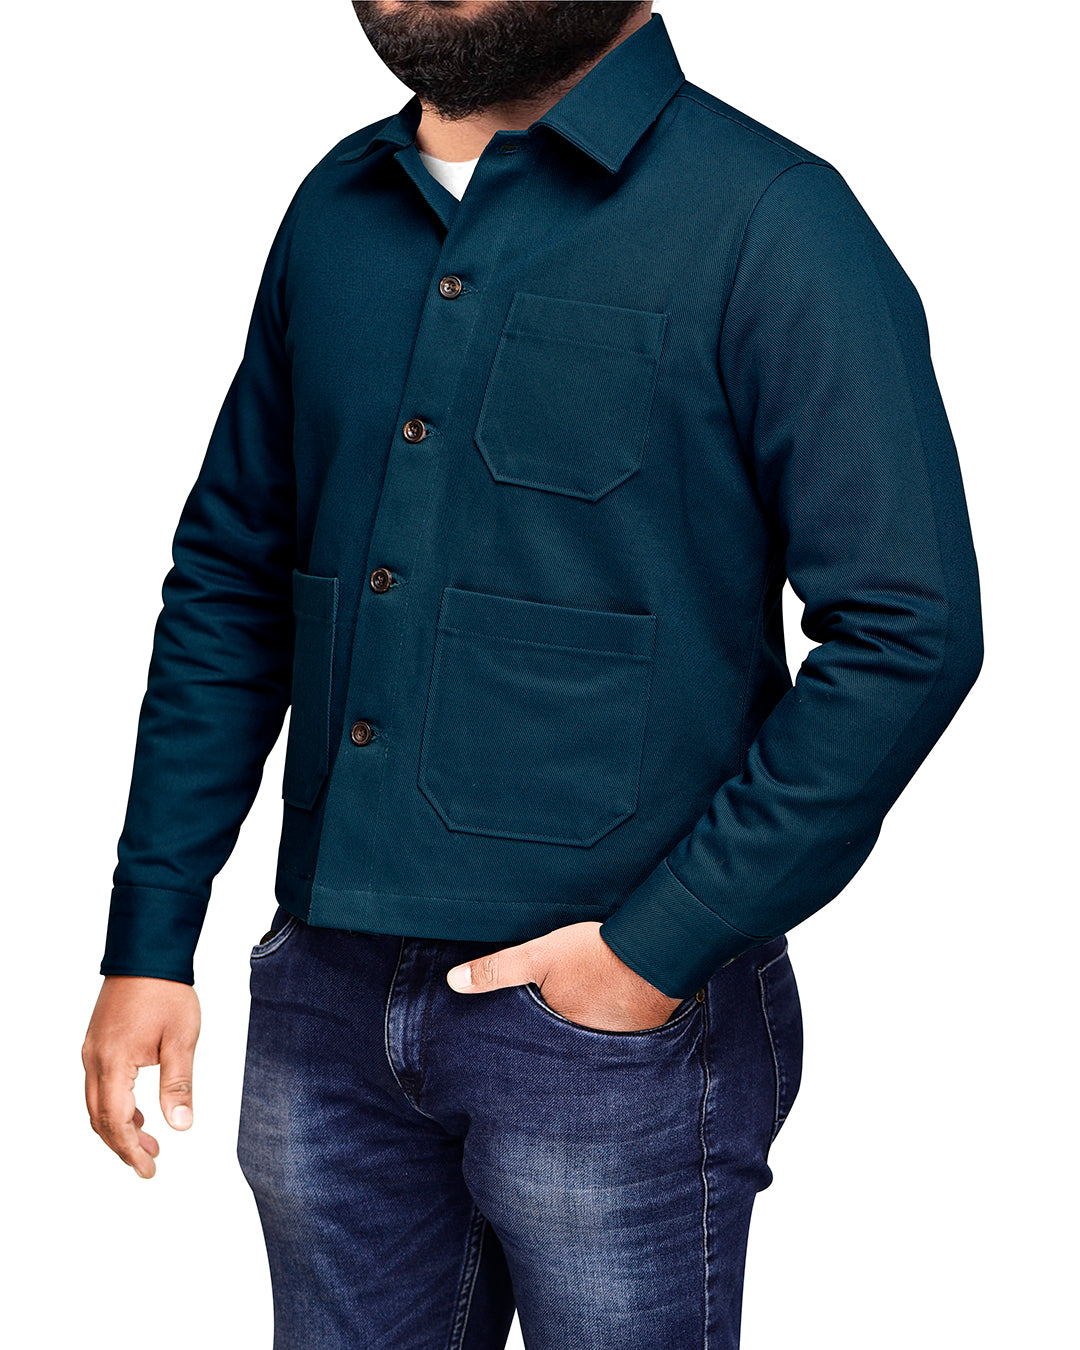 Model wearing the twill shirt jacket for men by Luxire in dark teal one hand in pocket